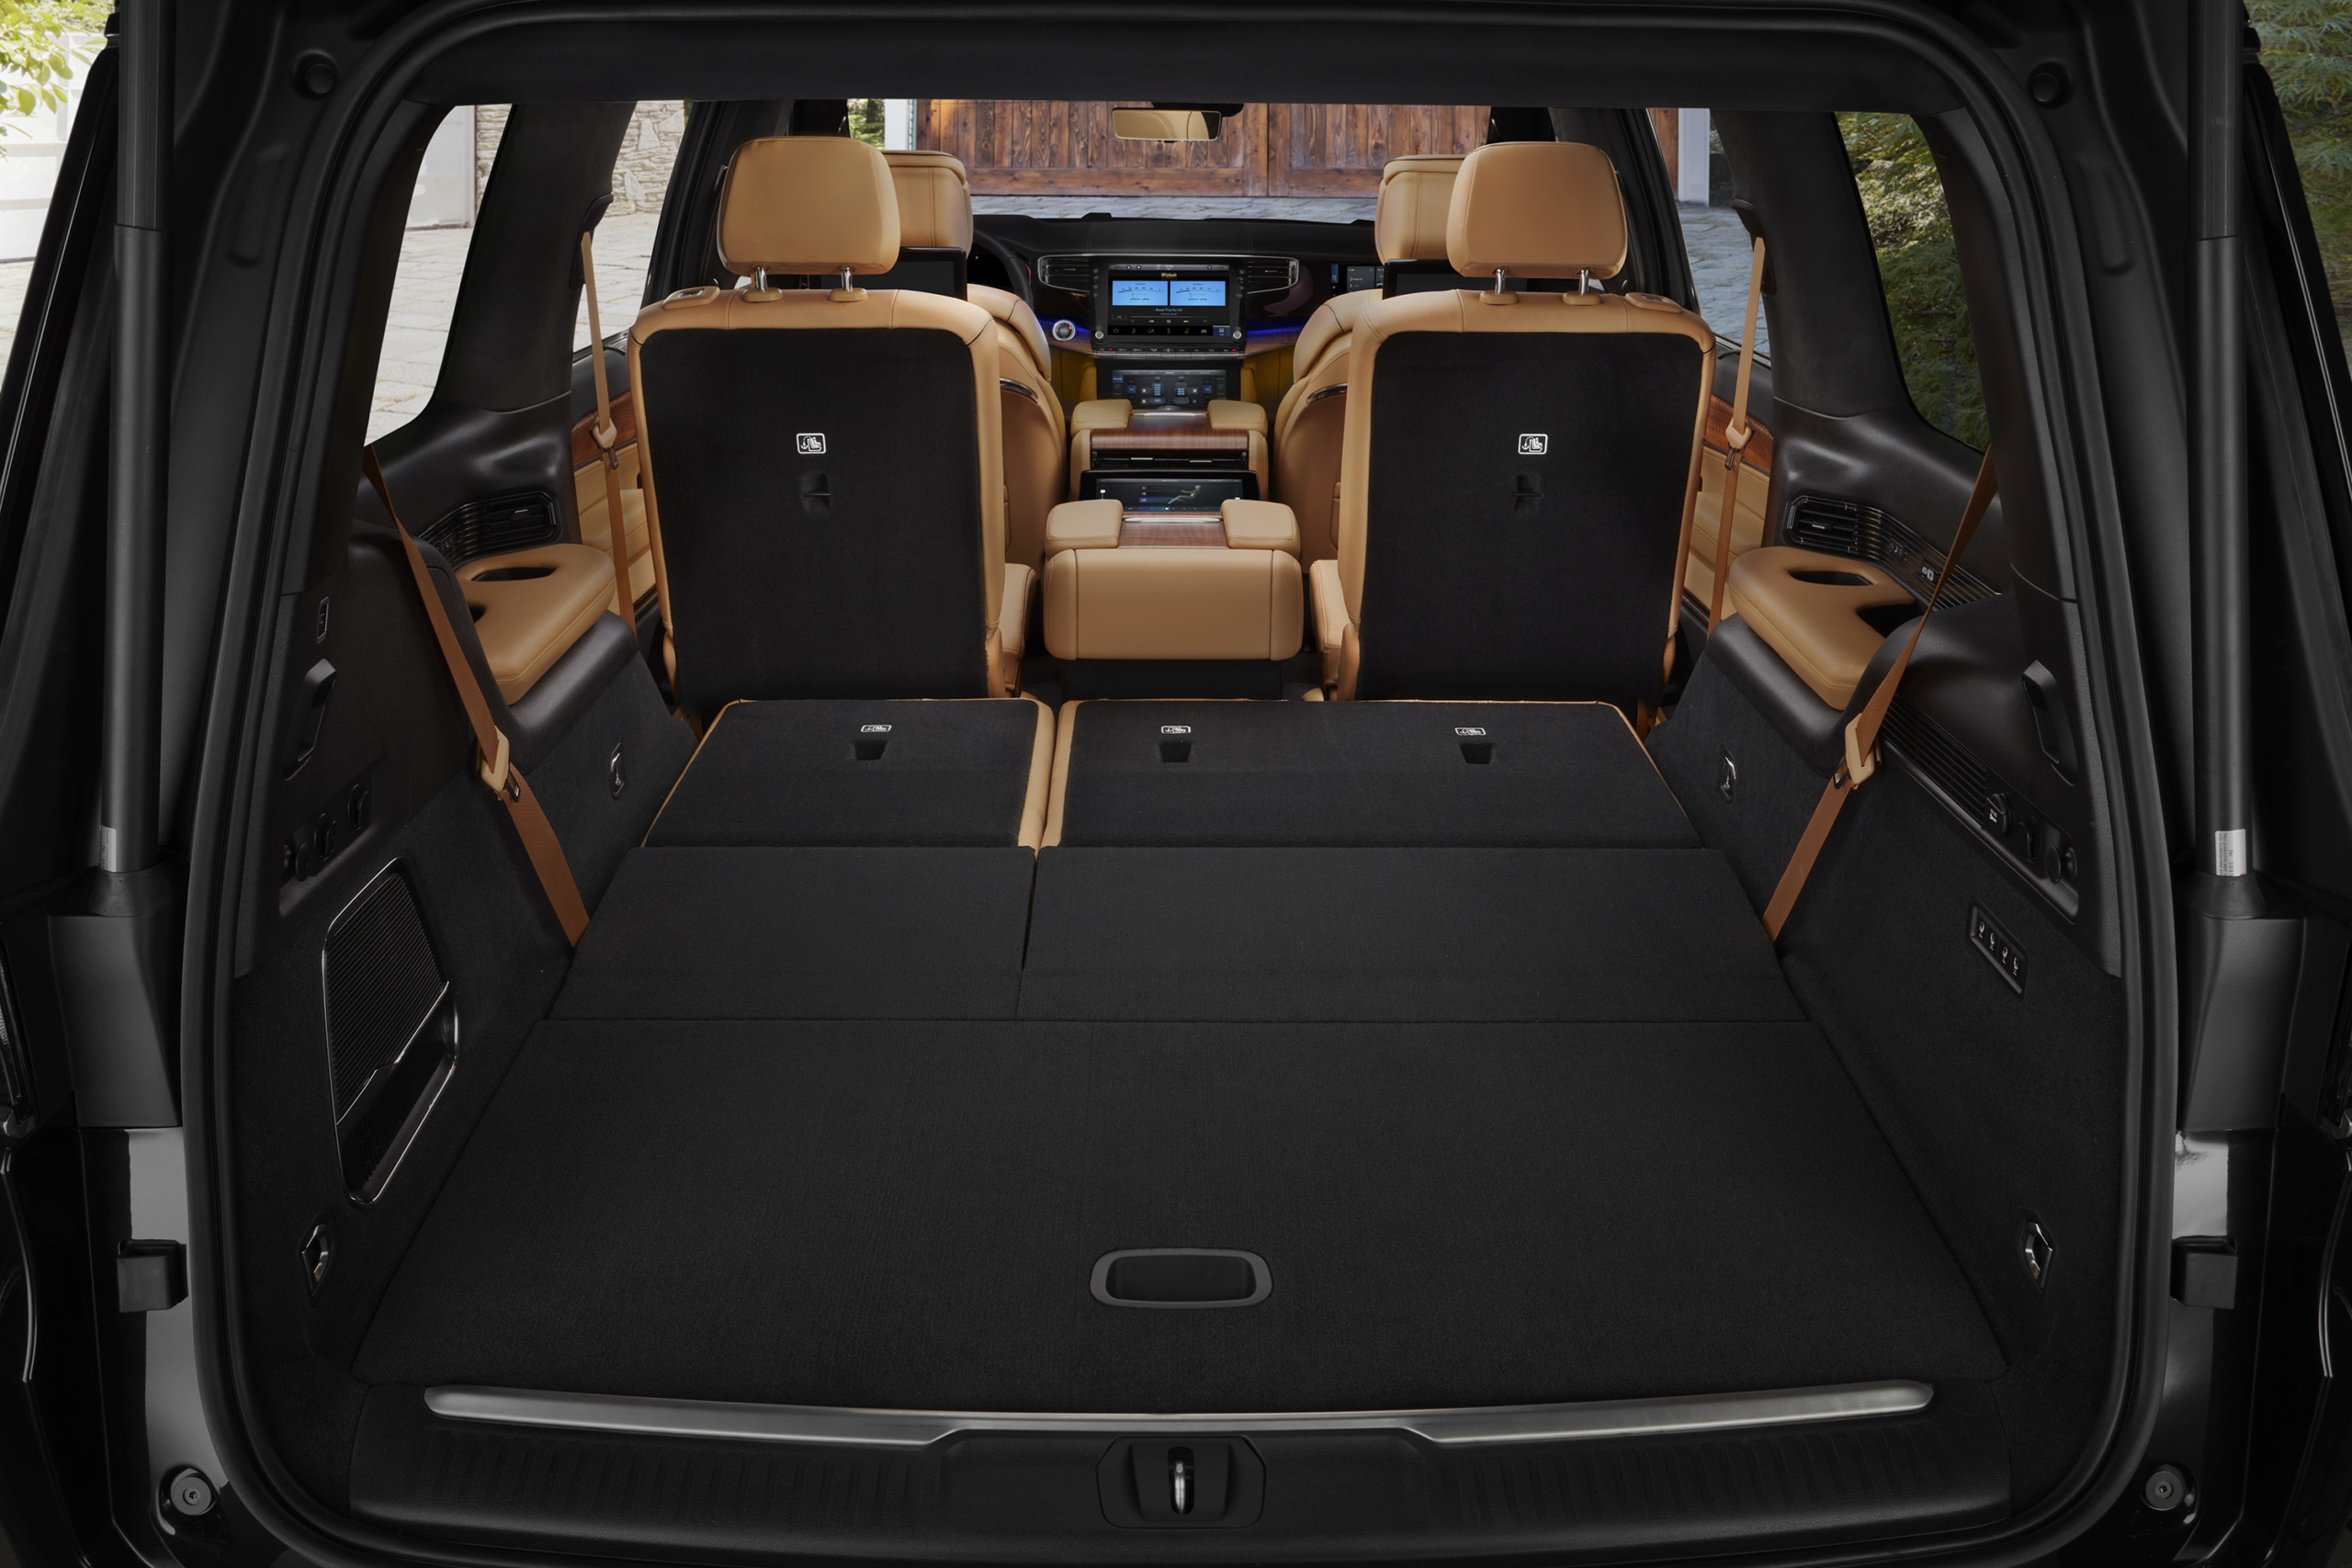 2022 Grand Wagoneer cargo space behind second row